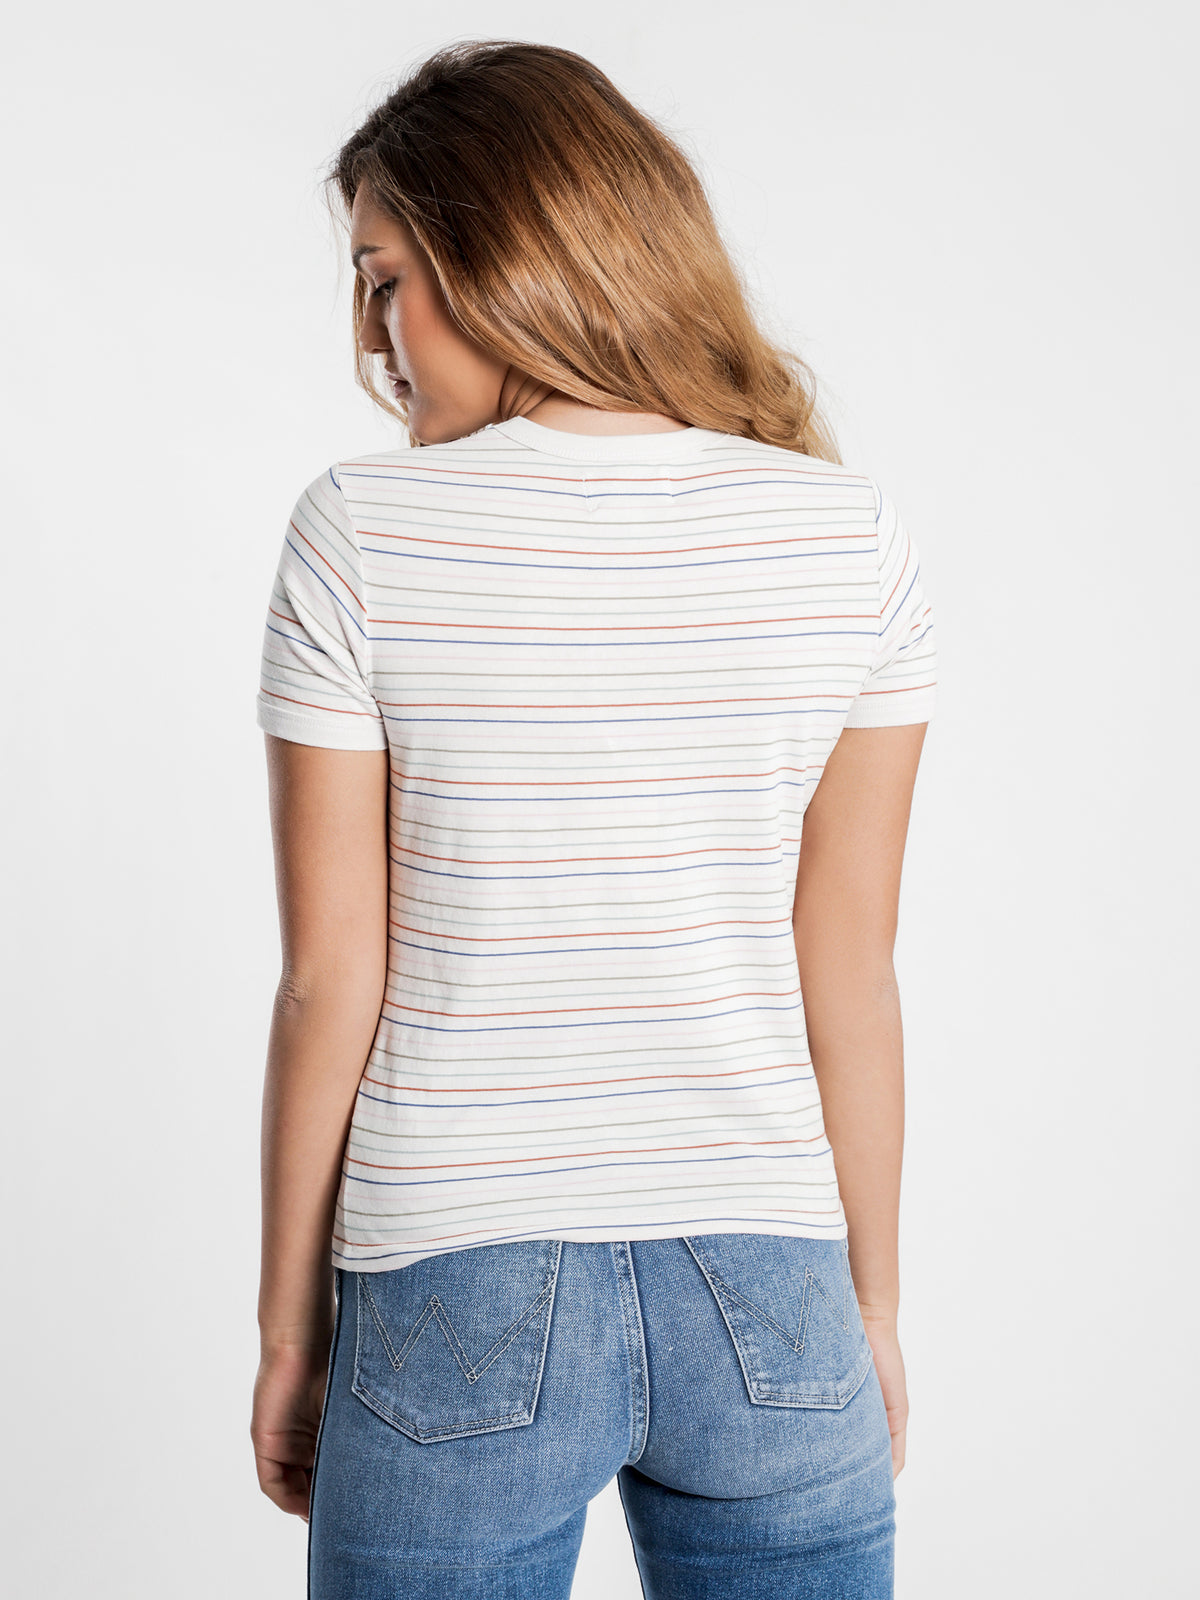 These Days T-Shirt in Pastel Stripe